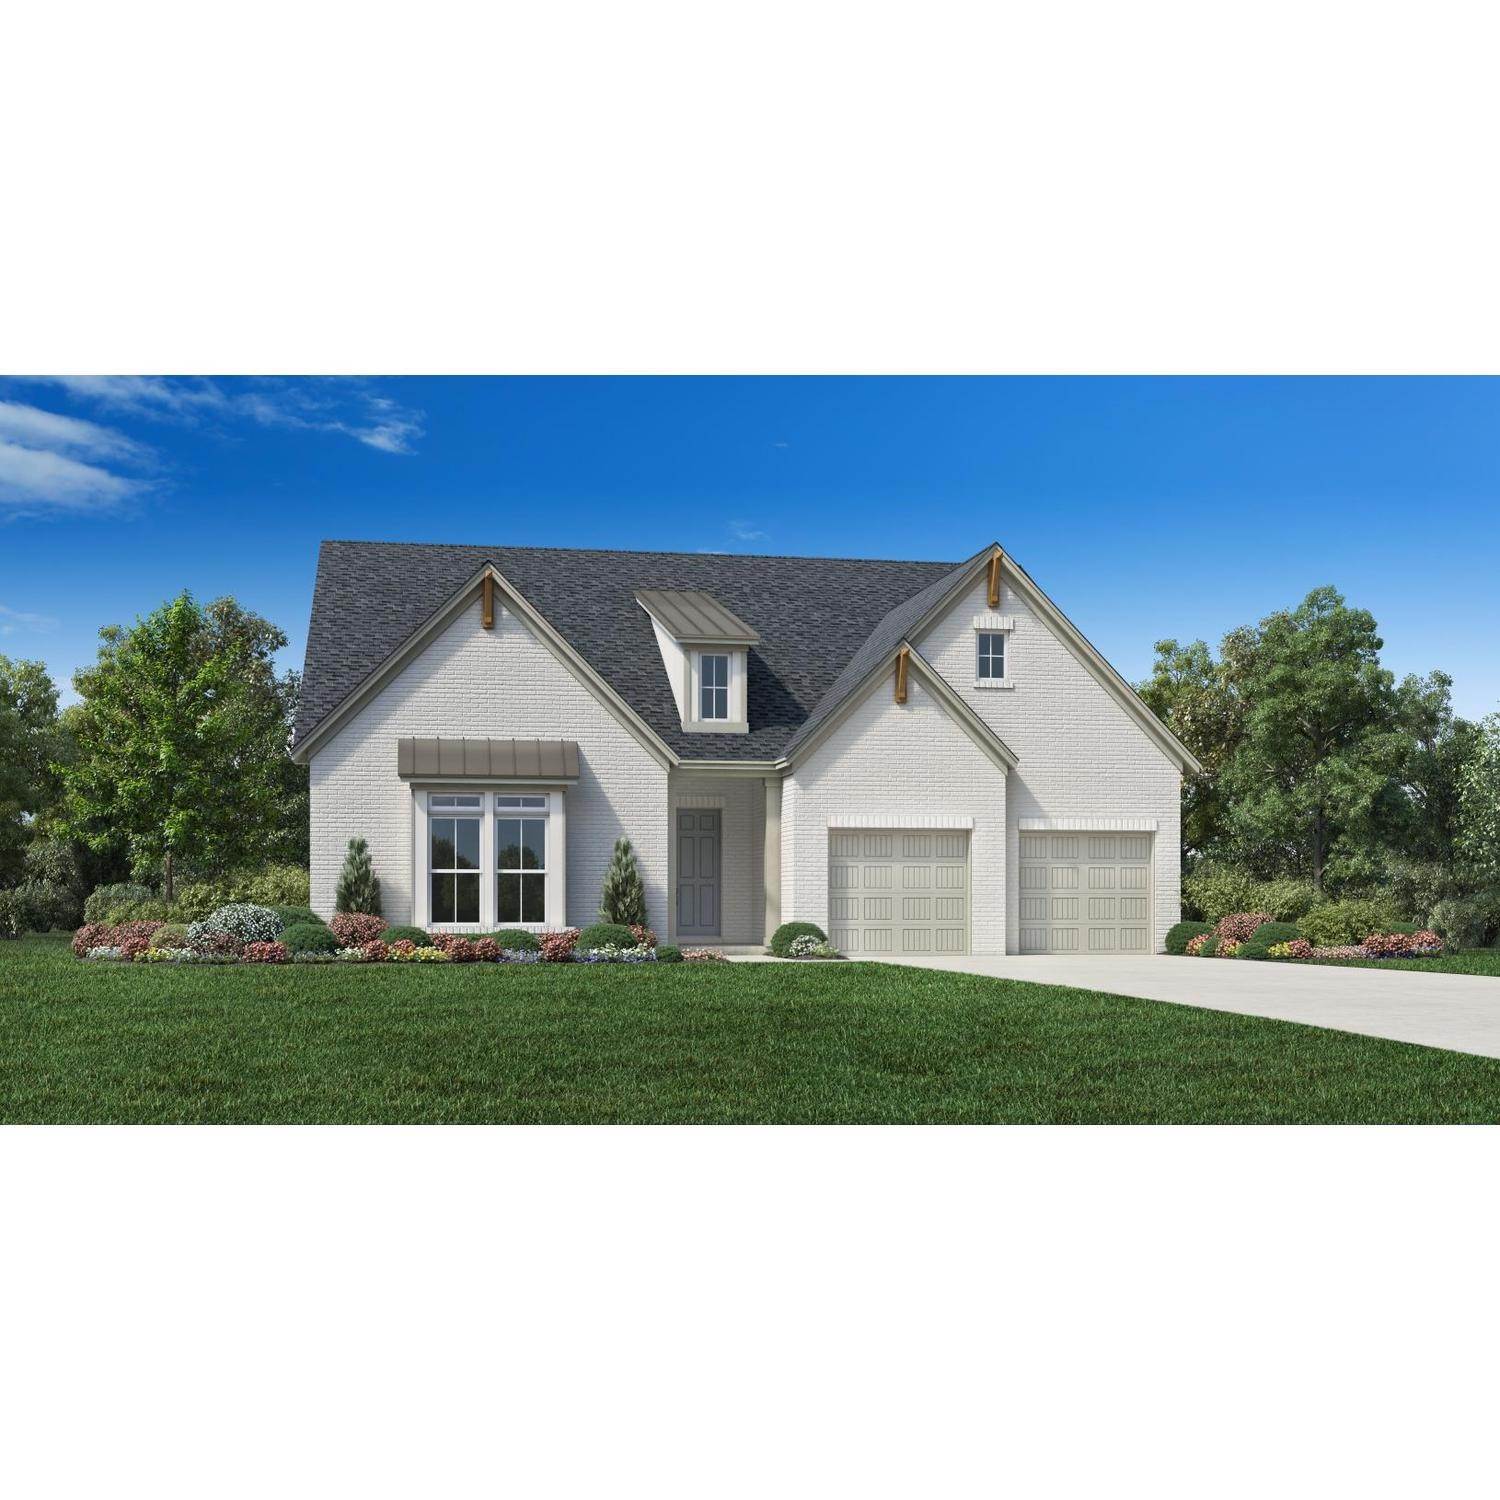 Single Family for Sale at Northbrooke Cumming, GA 30028